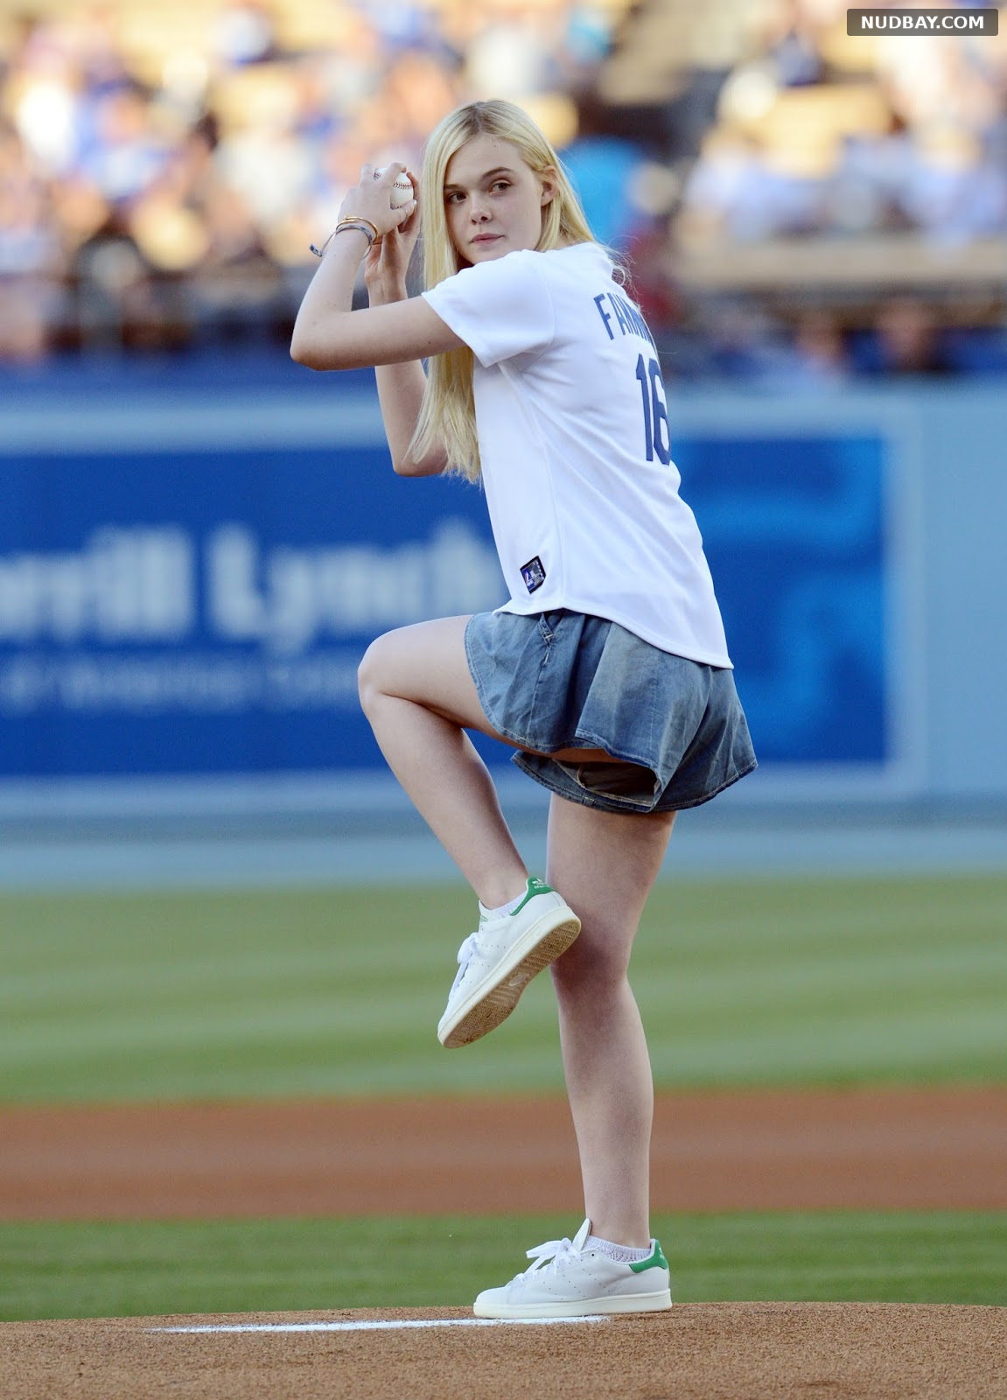 Elle Fanning Upskirt throws out the ceremonial first pitch at a Dodgers game